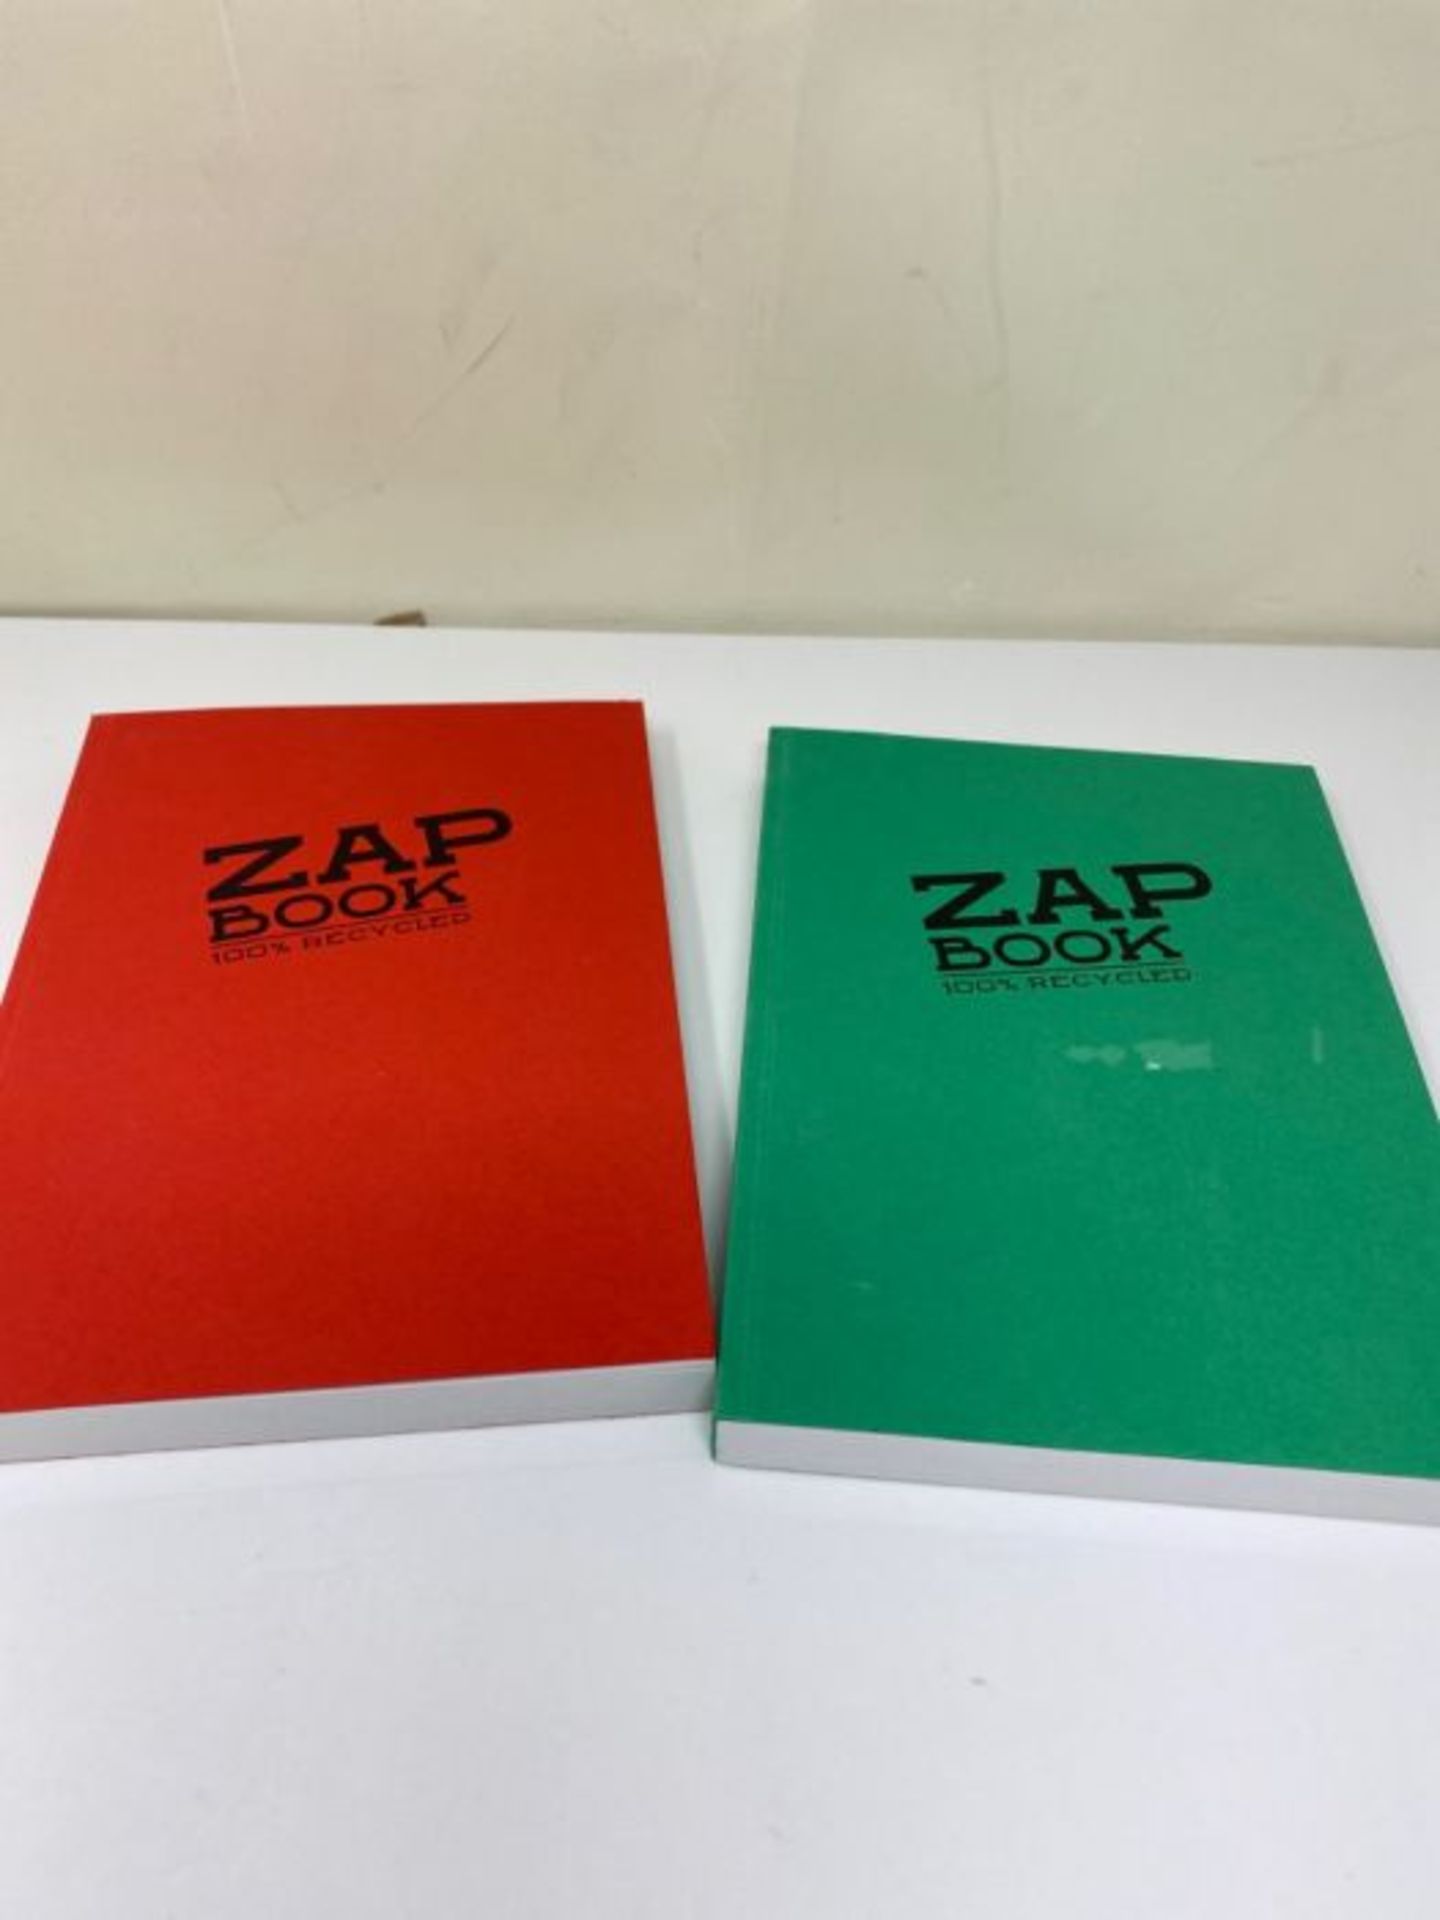 Clairefontaine Zap Book 3355AMZC Pack of 3 Glued Notebooks 160 Pages 100% Recycled Pla - Image 2 of 2